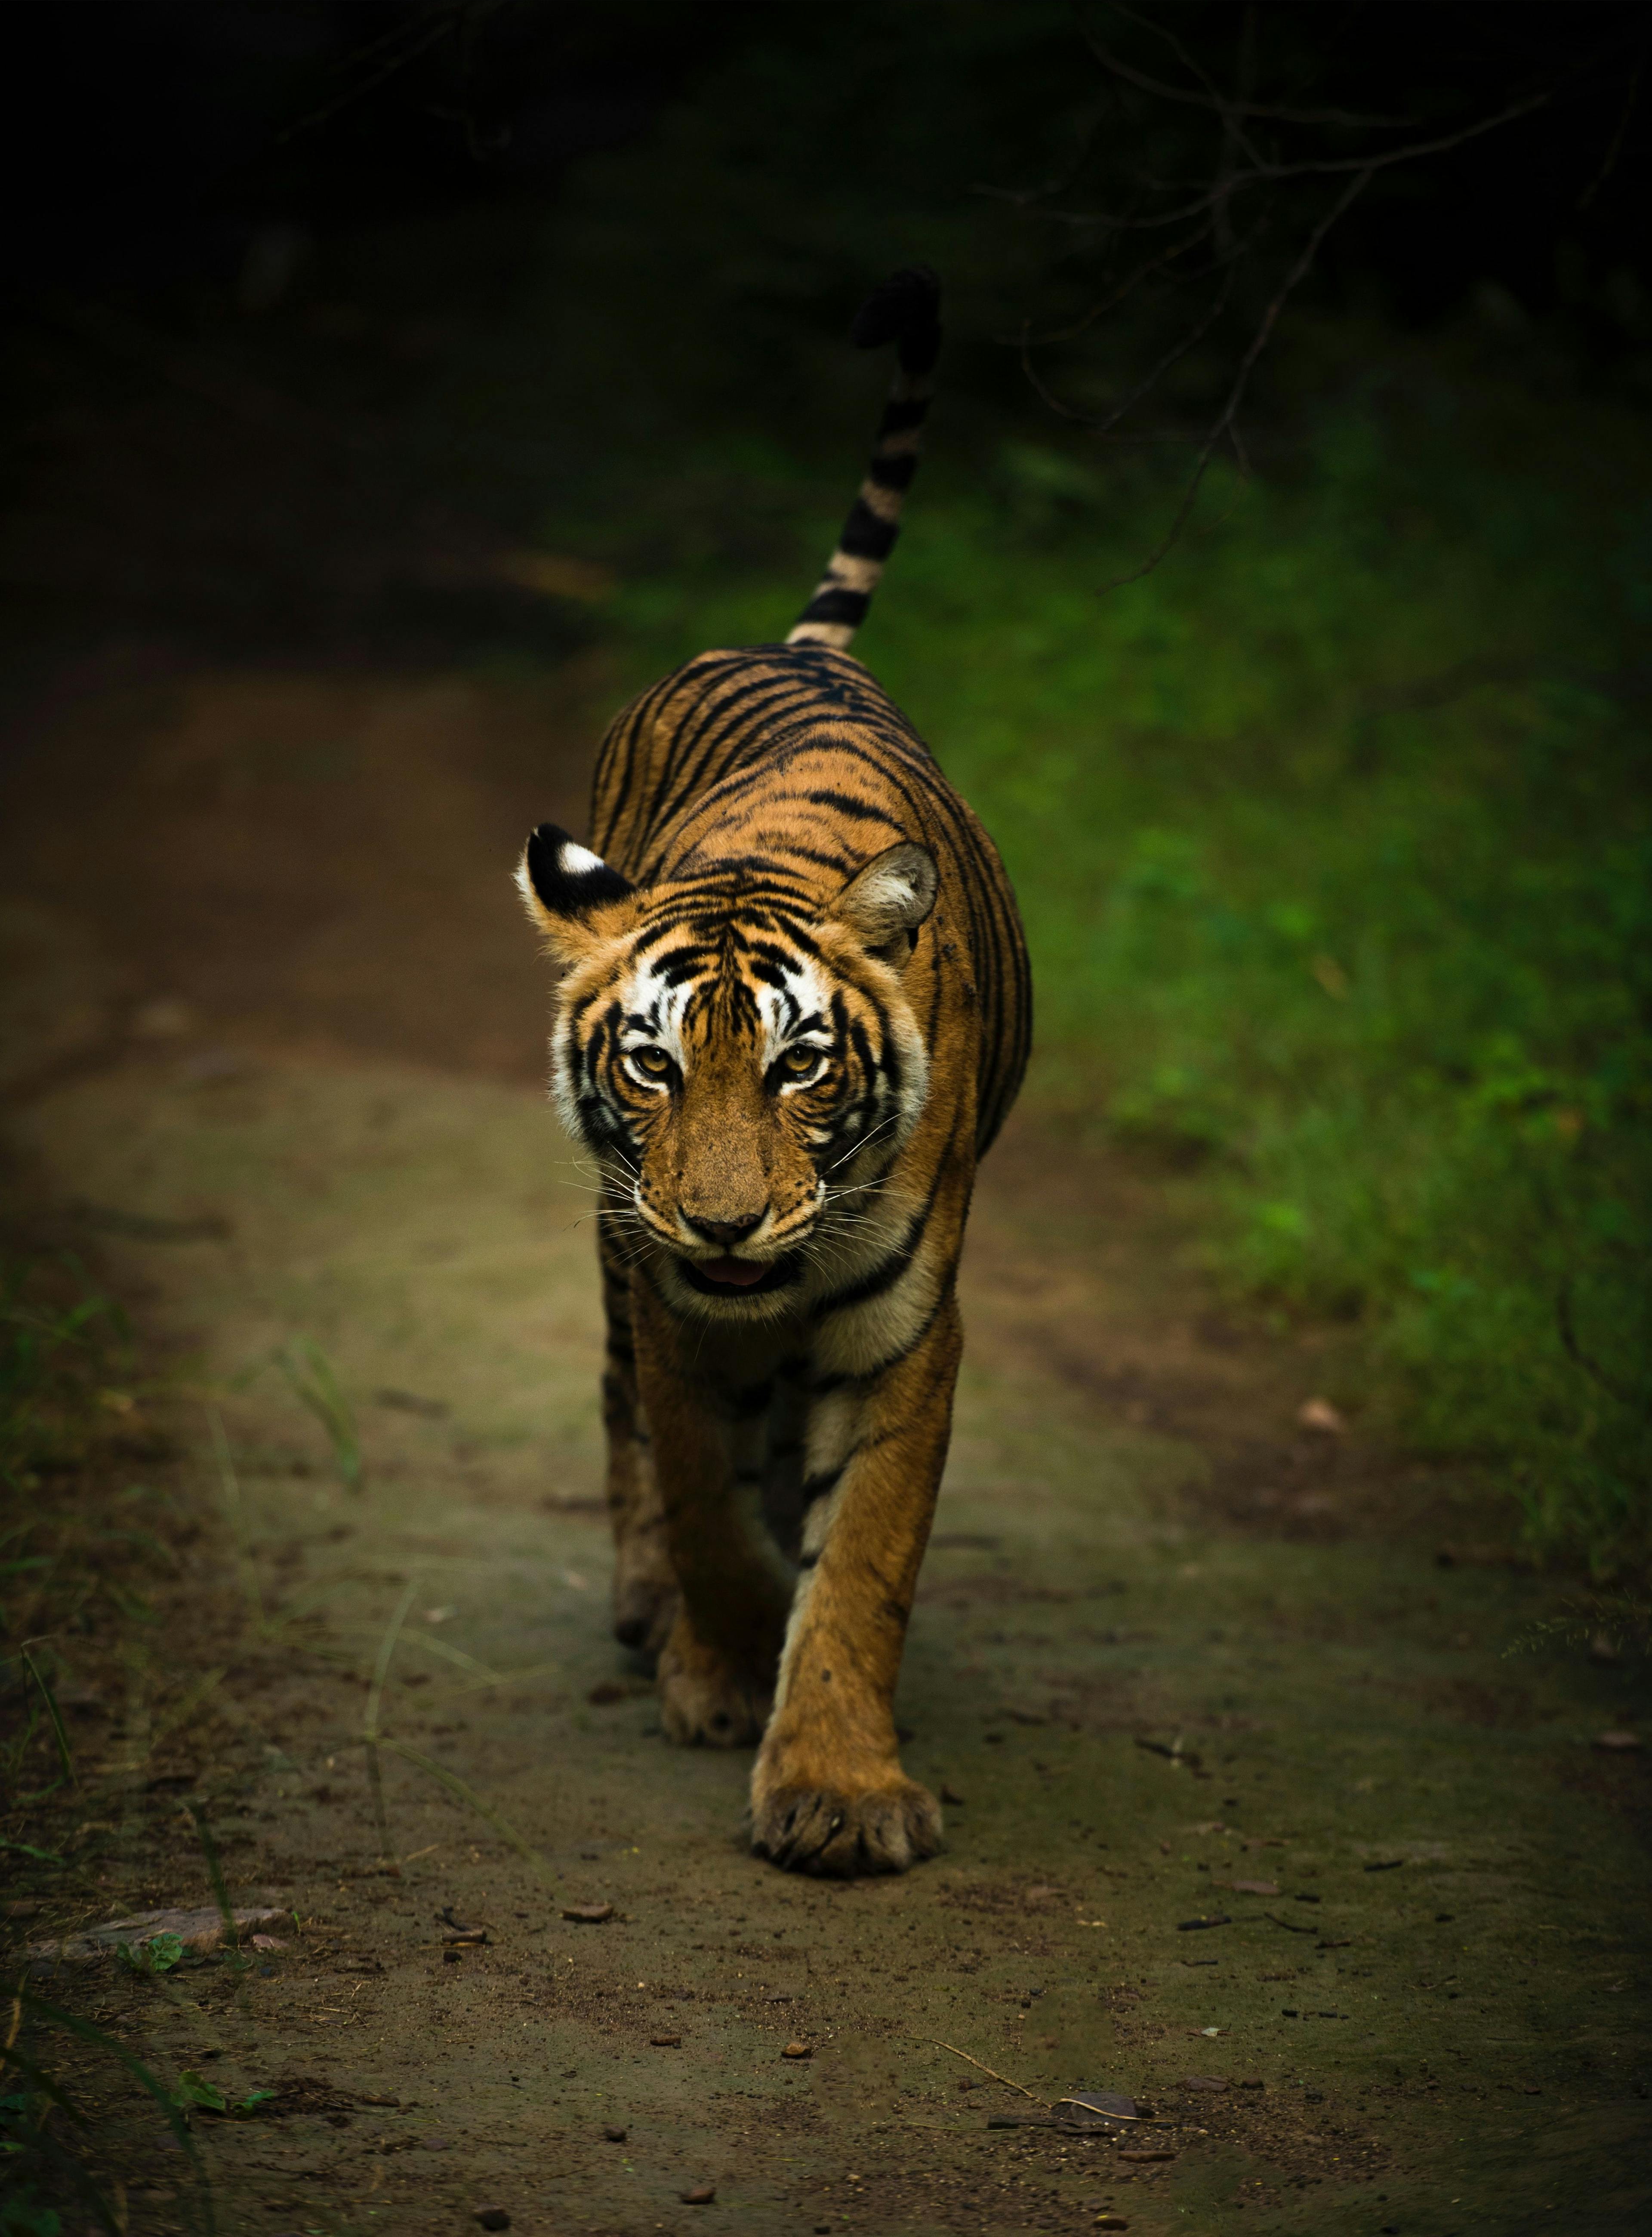 Tiger in Ranthambore National Park in India.